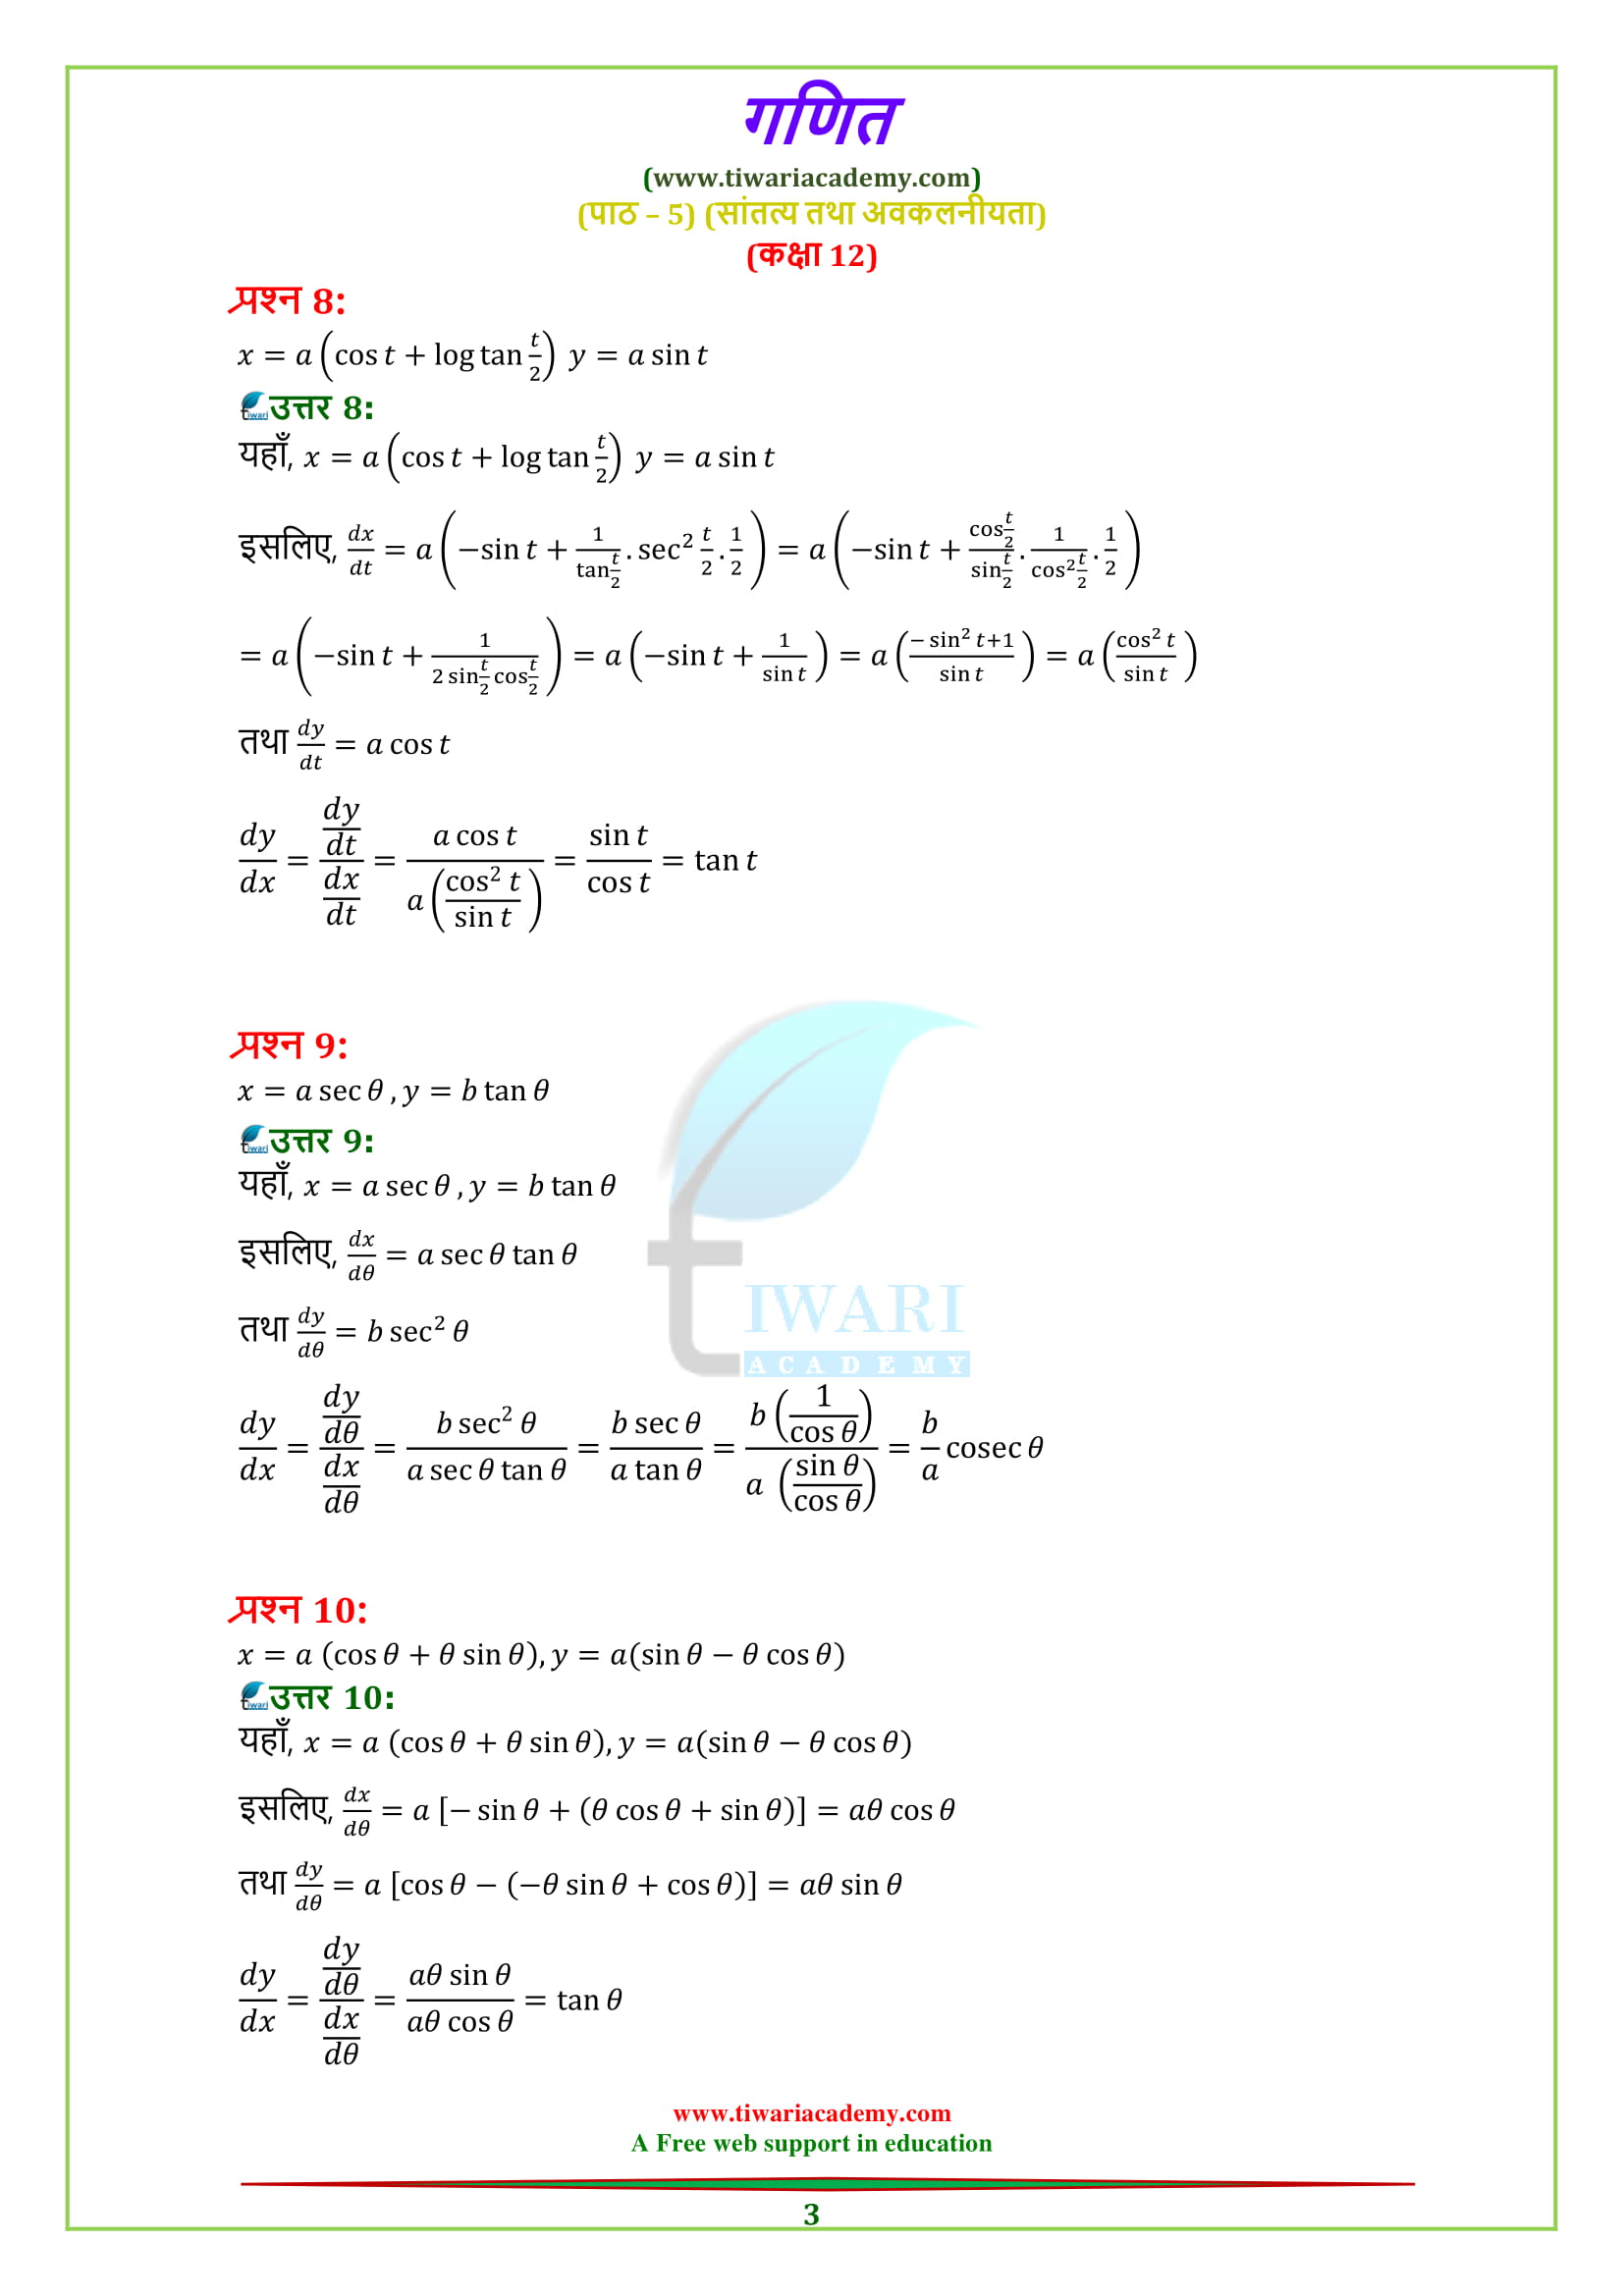 NCERT Solutions for Class 12 Maths Chapter 5 Exercise 5.6 Questions 1, 2, 3, 4, 5, 6, 7, 8, 9, 10